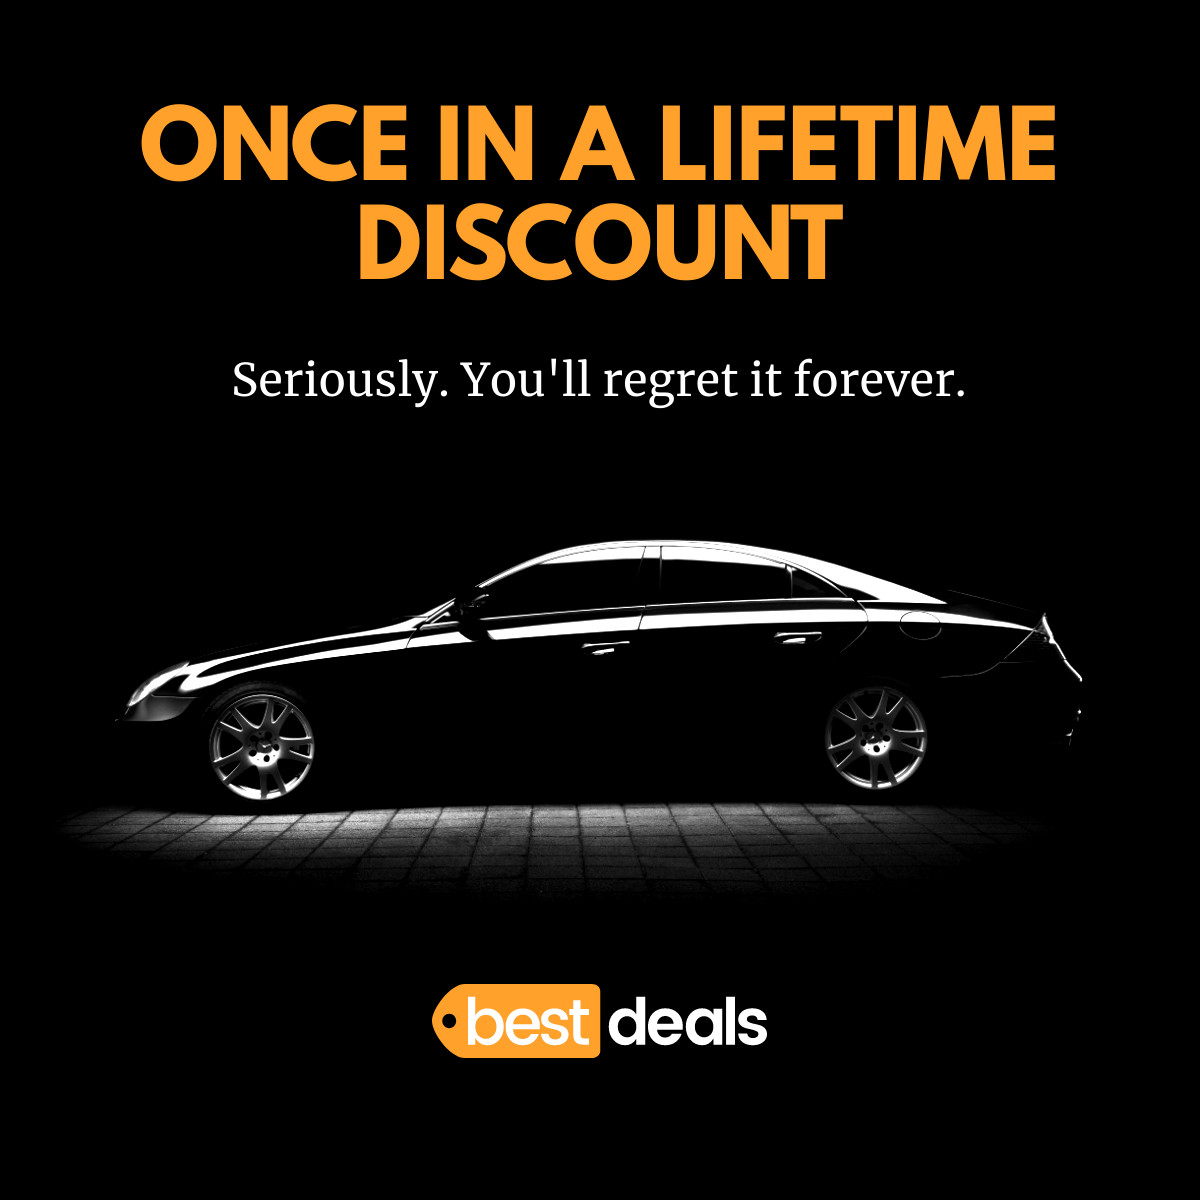 Once in a Lifetime Halloween Auto Discount